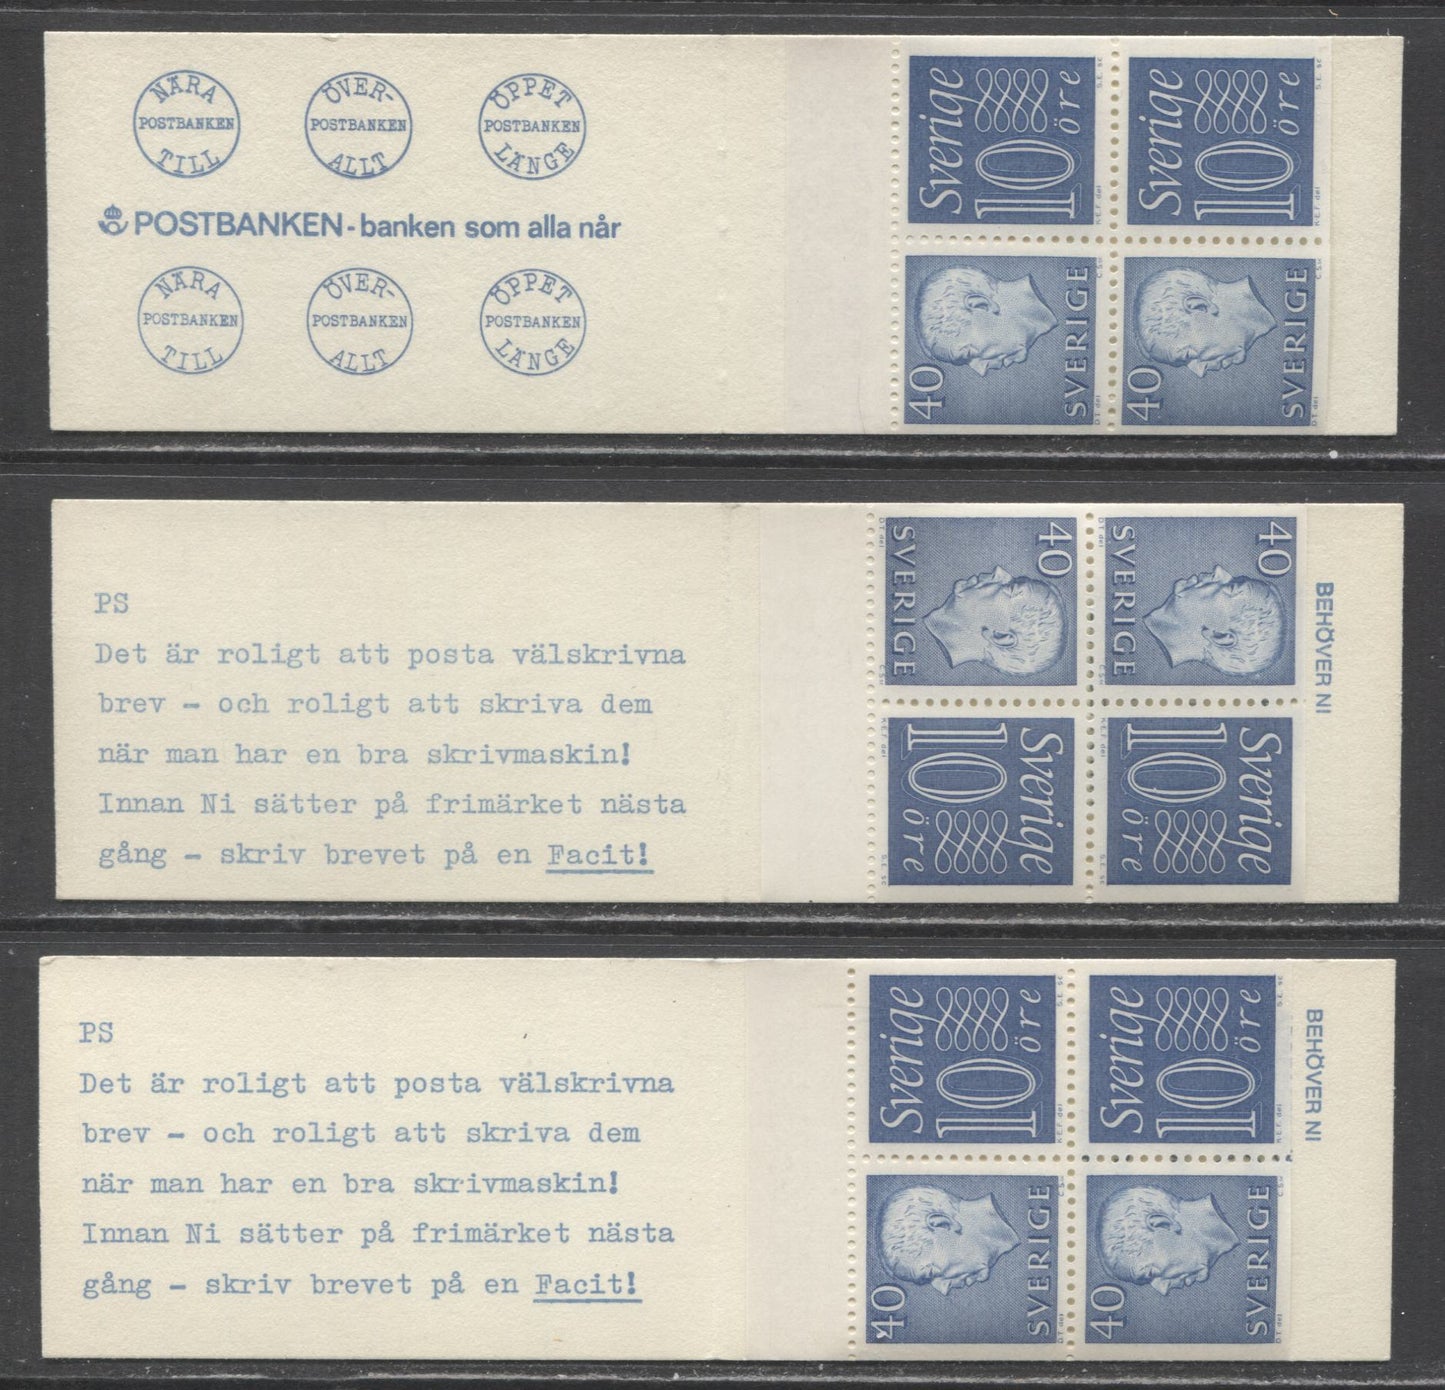 Lot 194 Sweden SC#669b (Facit #HA12ARV/HA12B1RV) 1964 Re-Engraved King Gustav VI Adolf Definitive Issue, Different Back Cover Designs, Upright & Inverted Panes, 10 Ore Stamps At left and Right, 6 VFNH Booklets of 4 (2 +2), Estimated Value $22